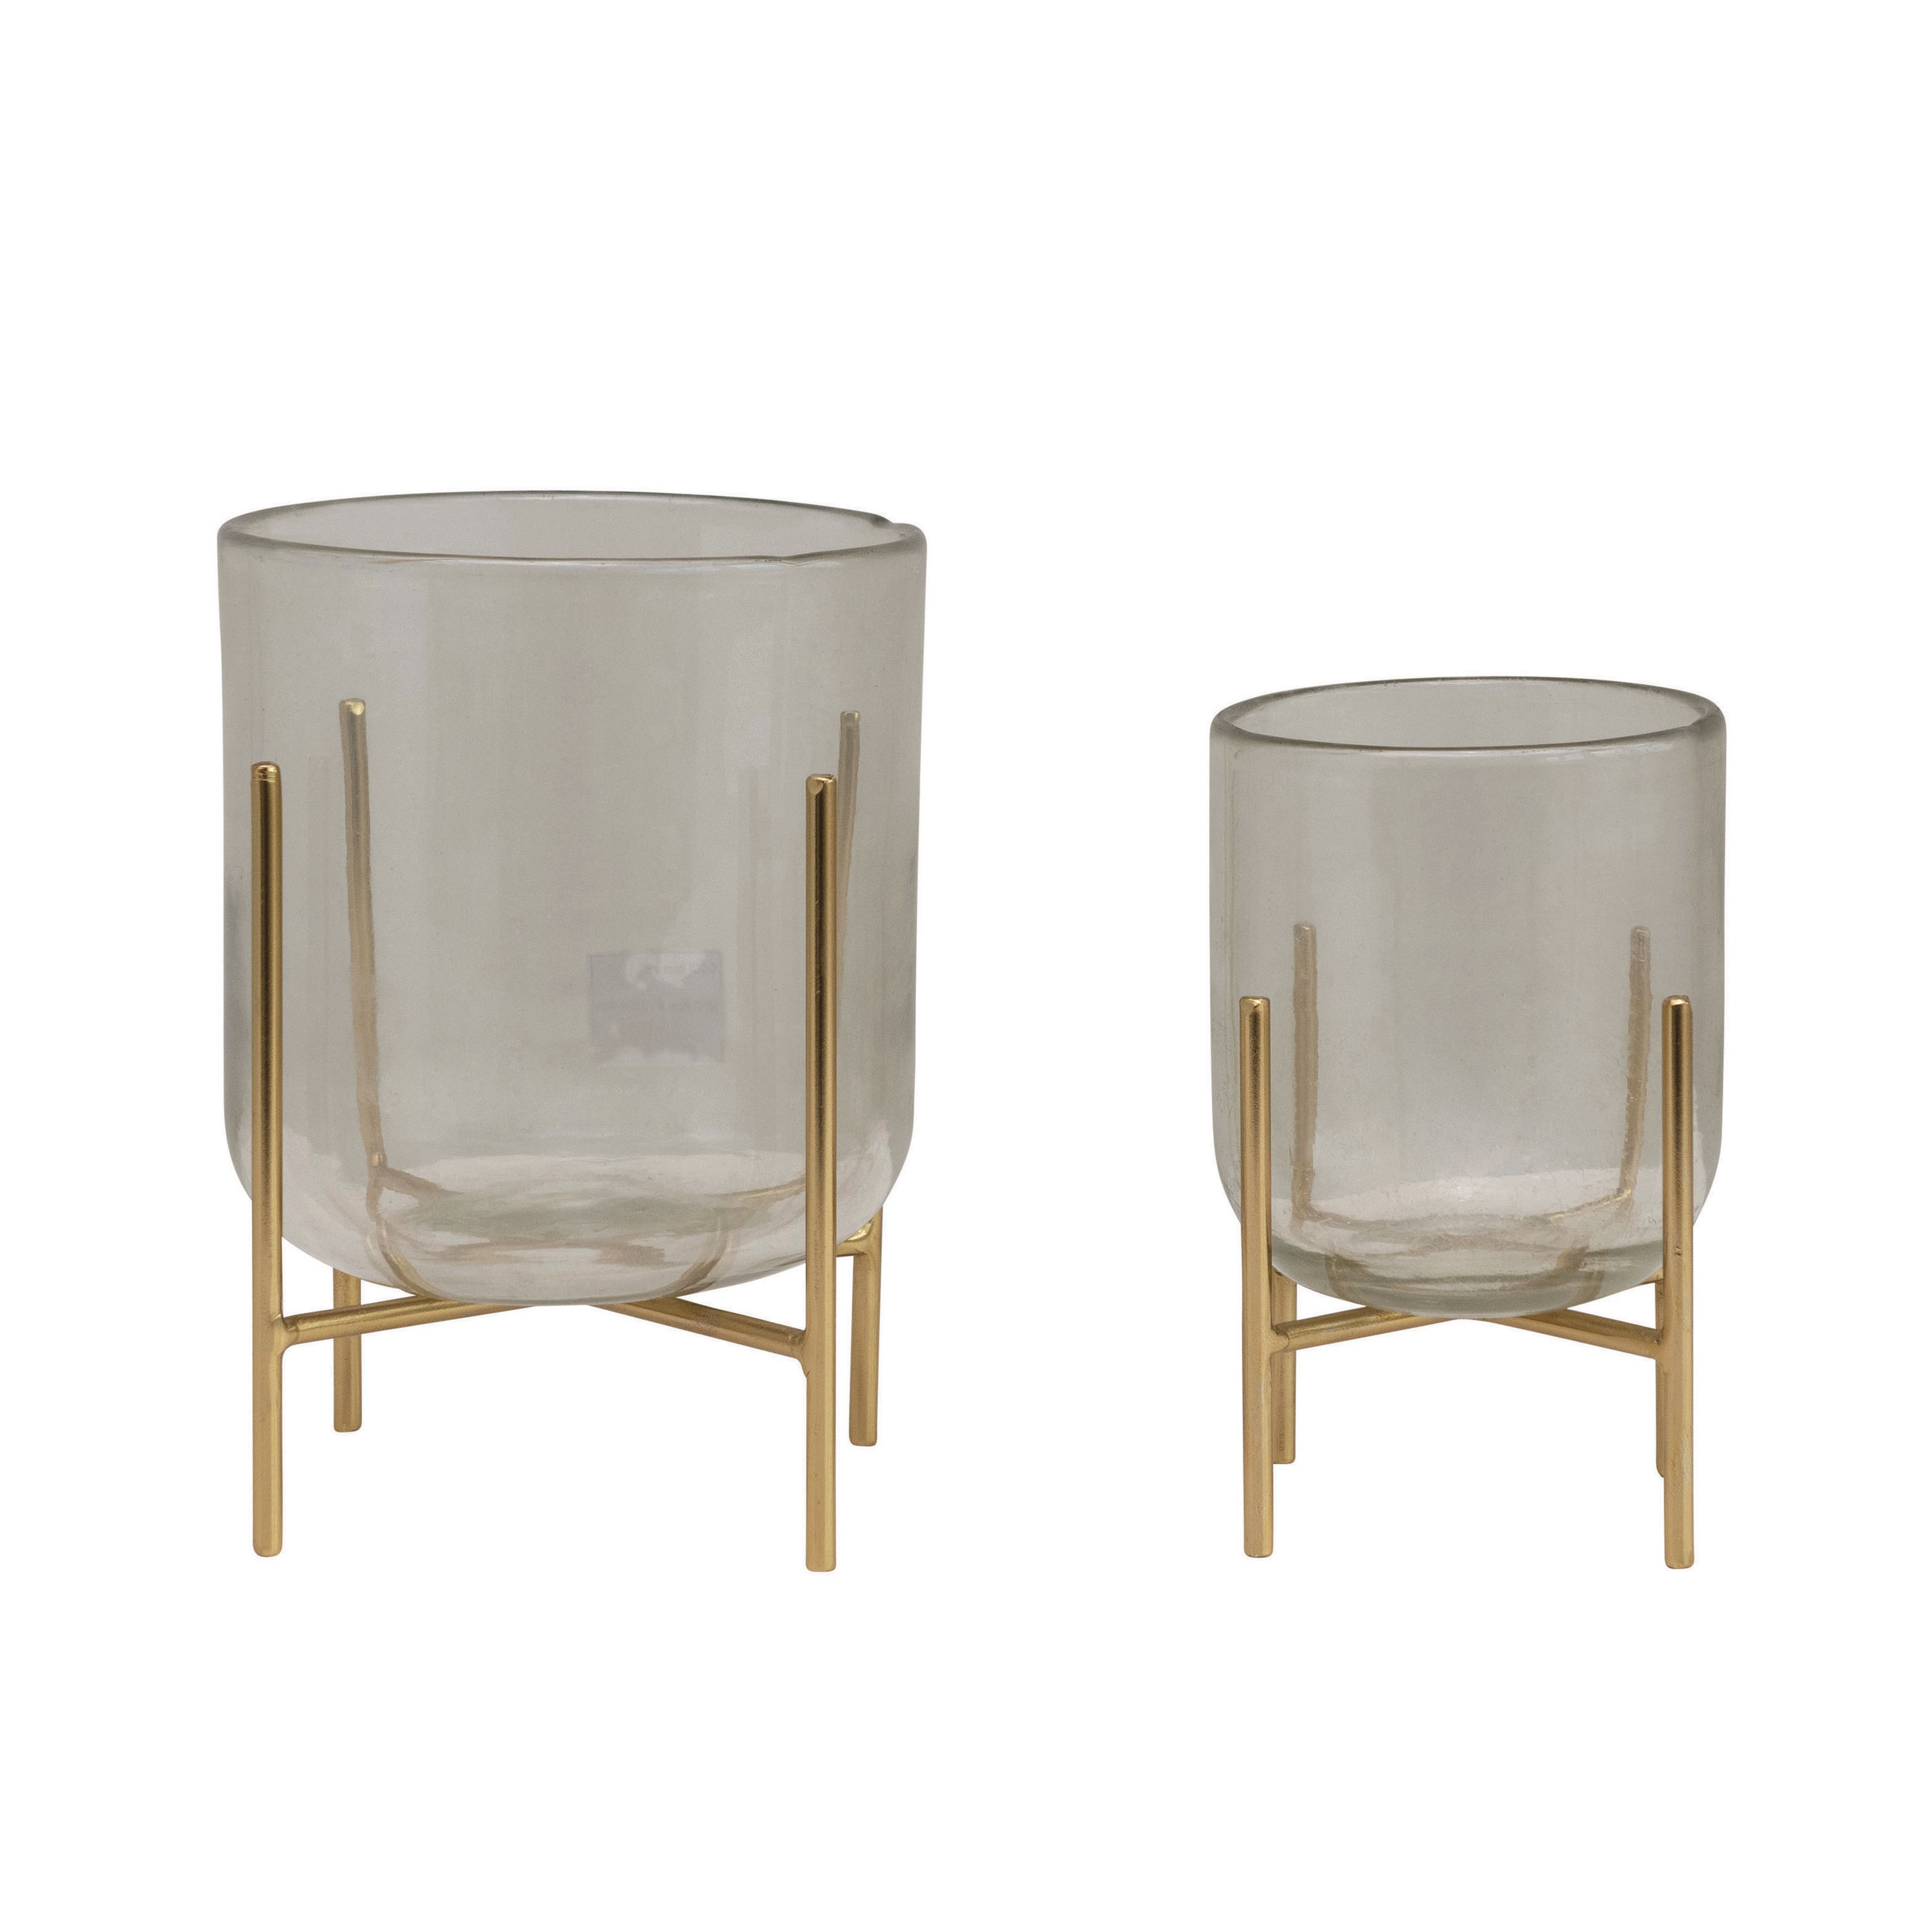 Vases/Candle Holders with Metal Stands, Gold Finish, Set of 2 - Image 0